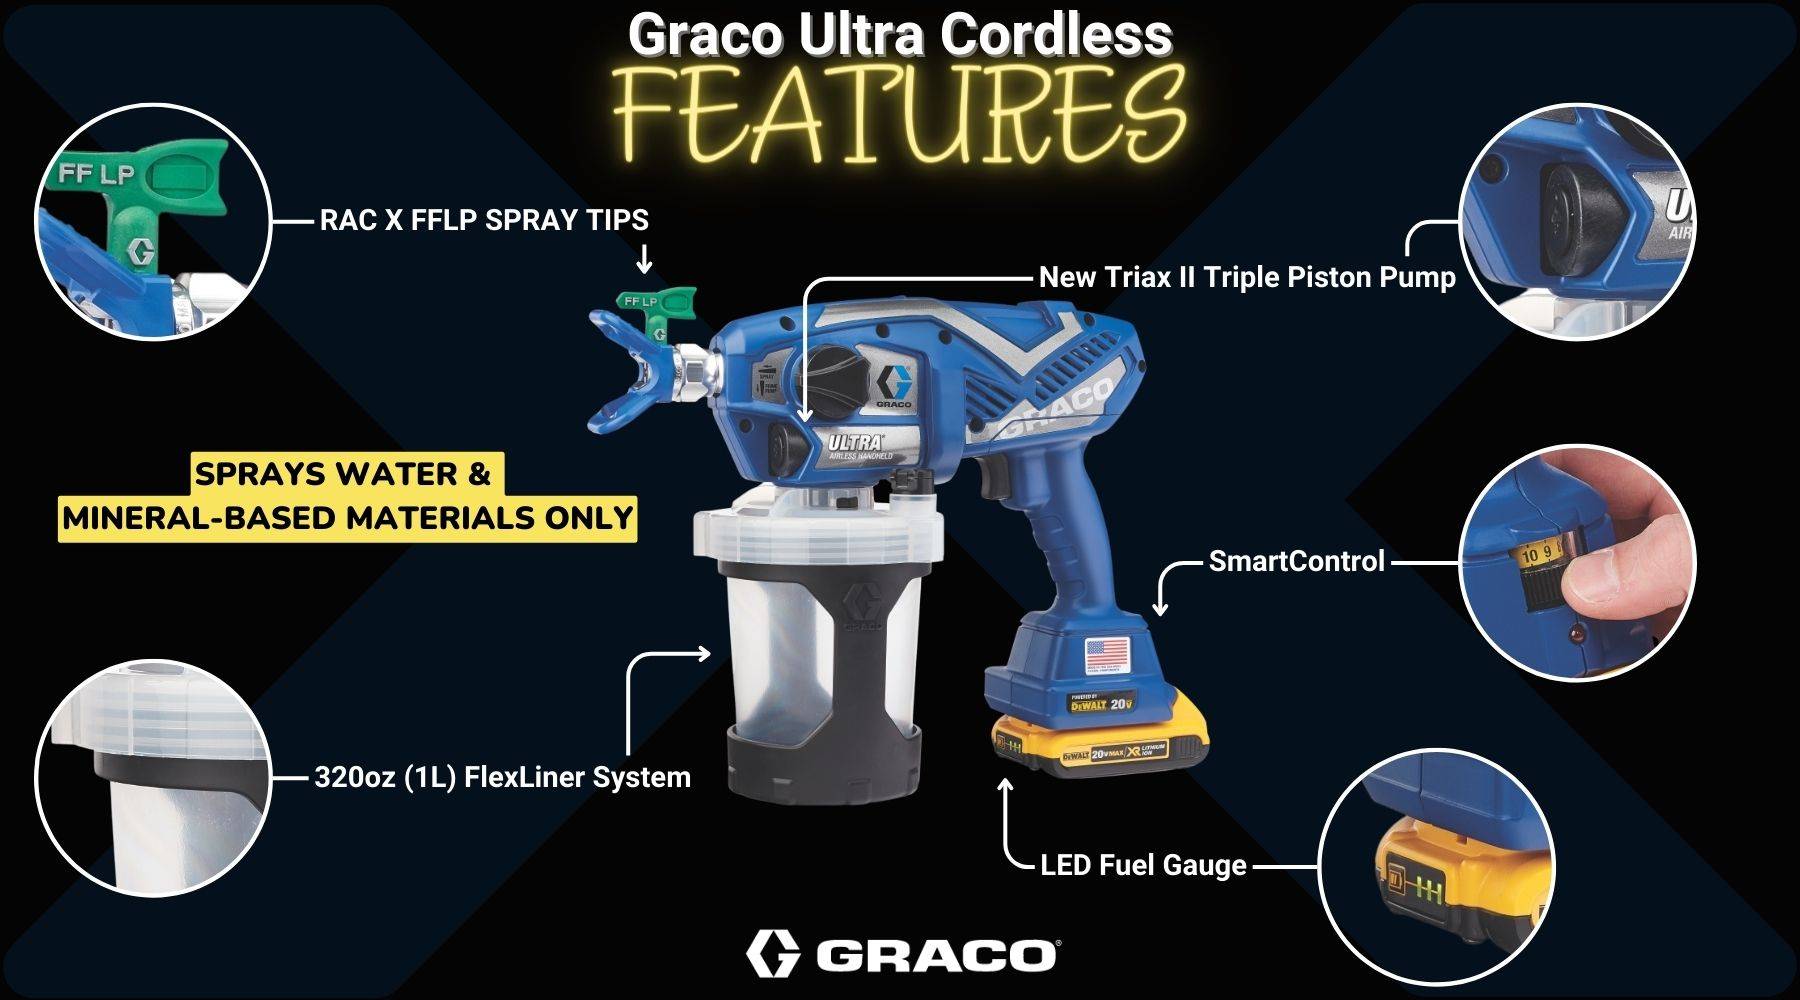 Graco Ultra Cordless Features 17M363